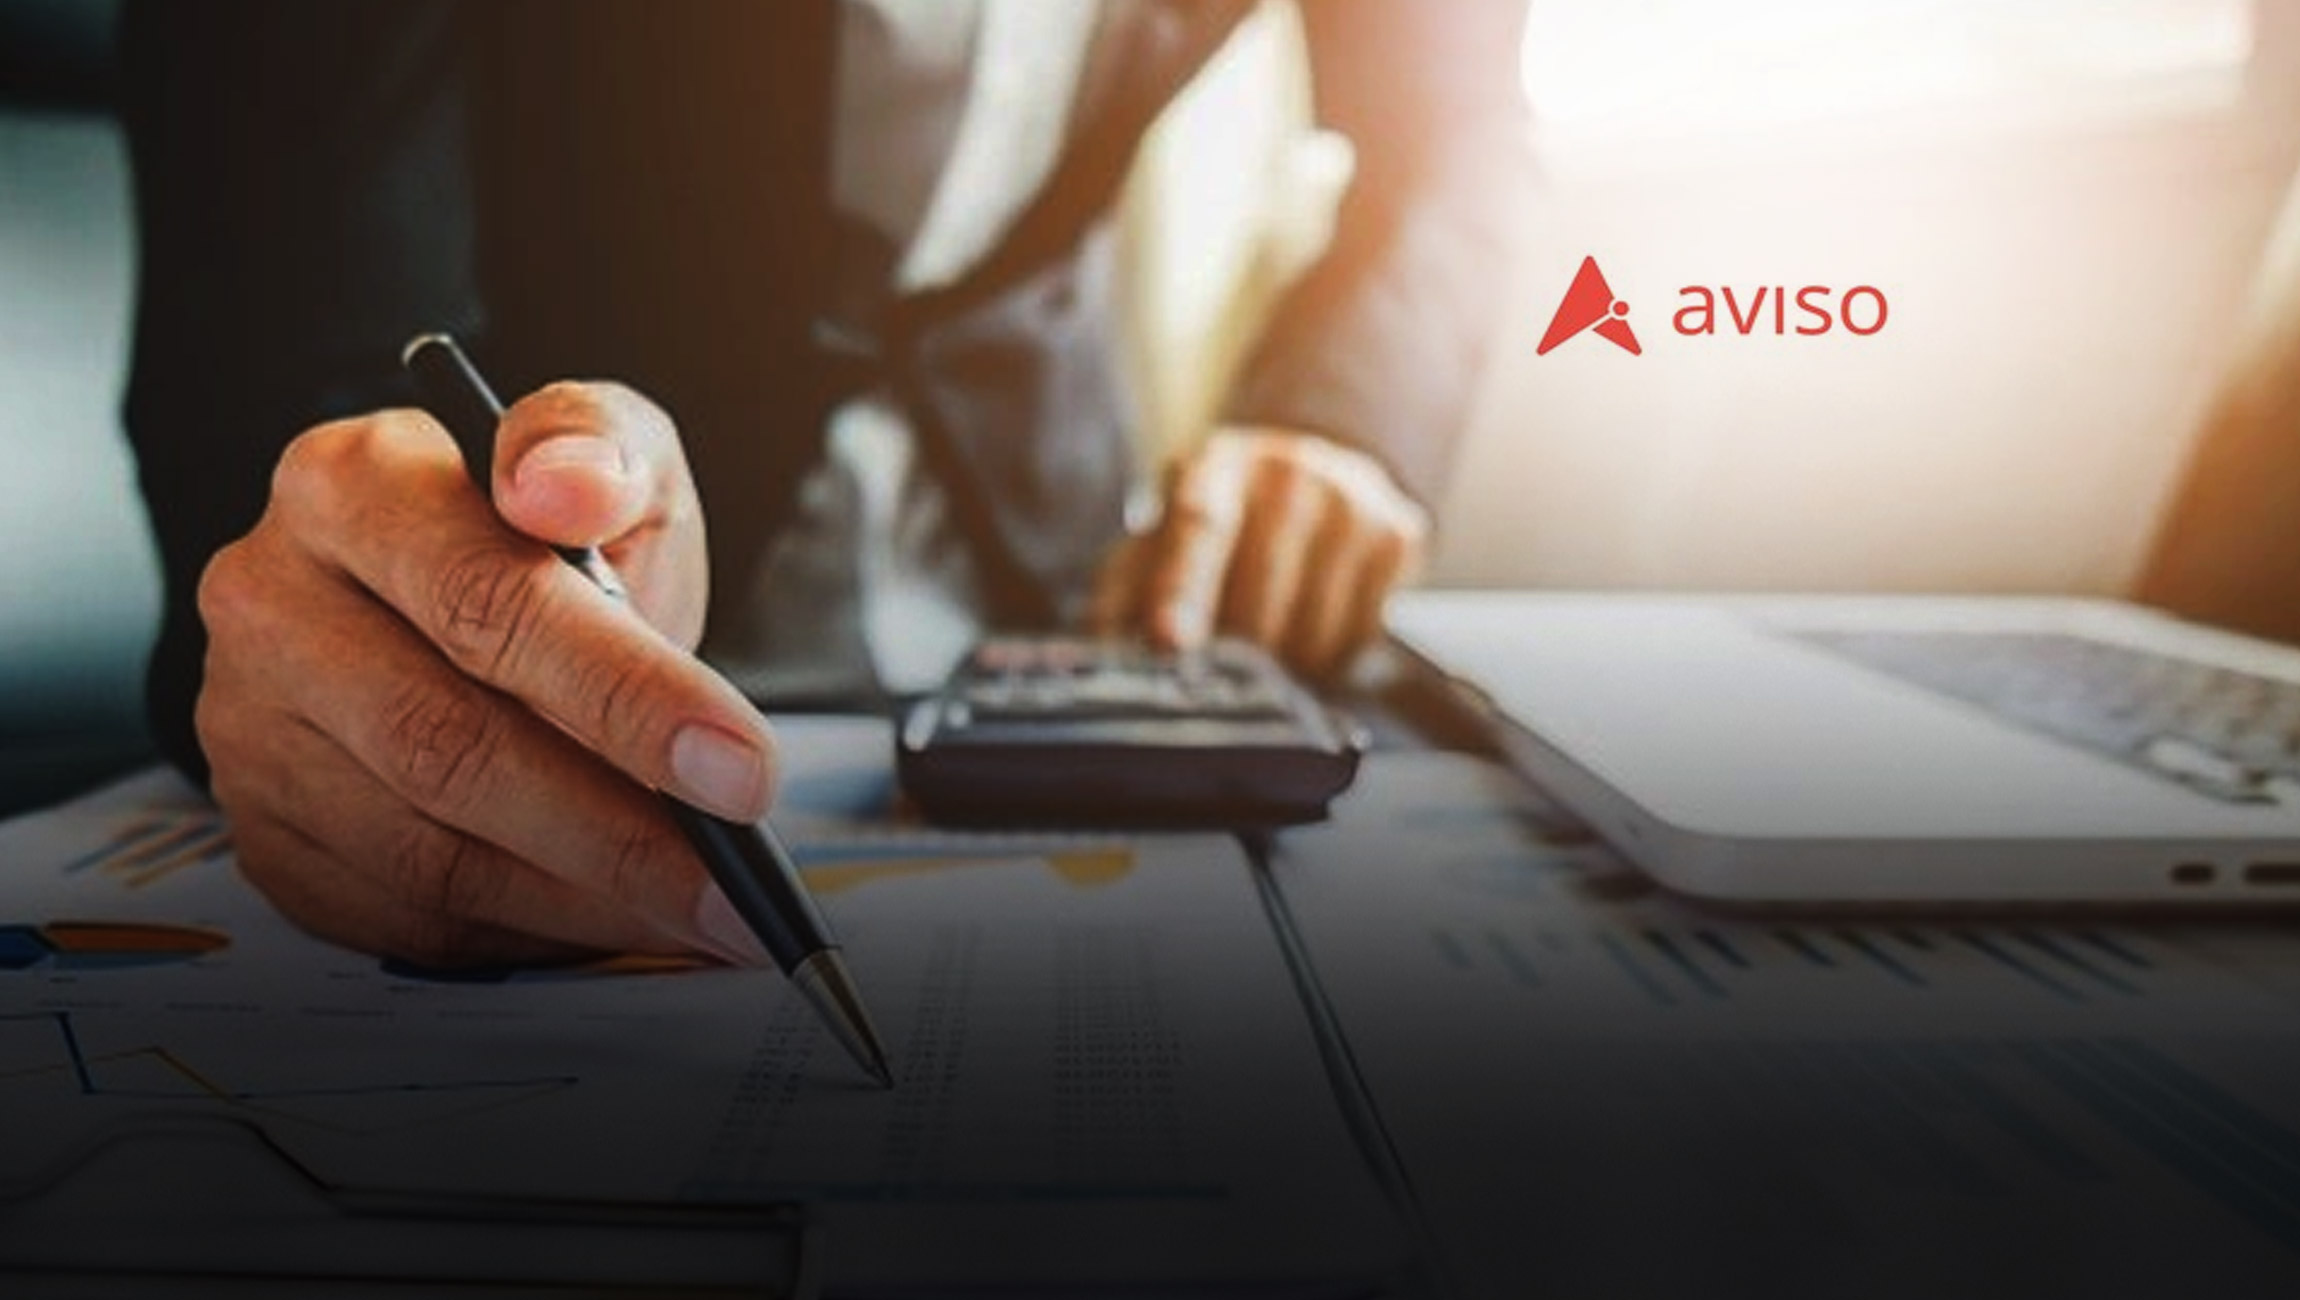 Aviso Named Strong Performer in Revenue Operations and Intelligence With Highest Score on Innovation Roadmap, According to Top Analysts